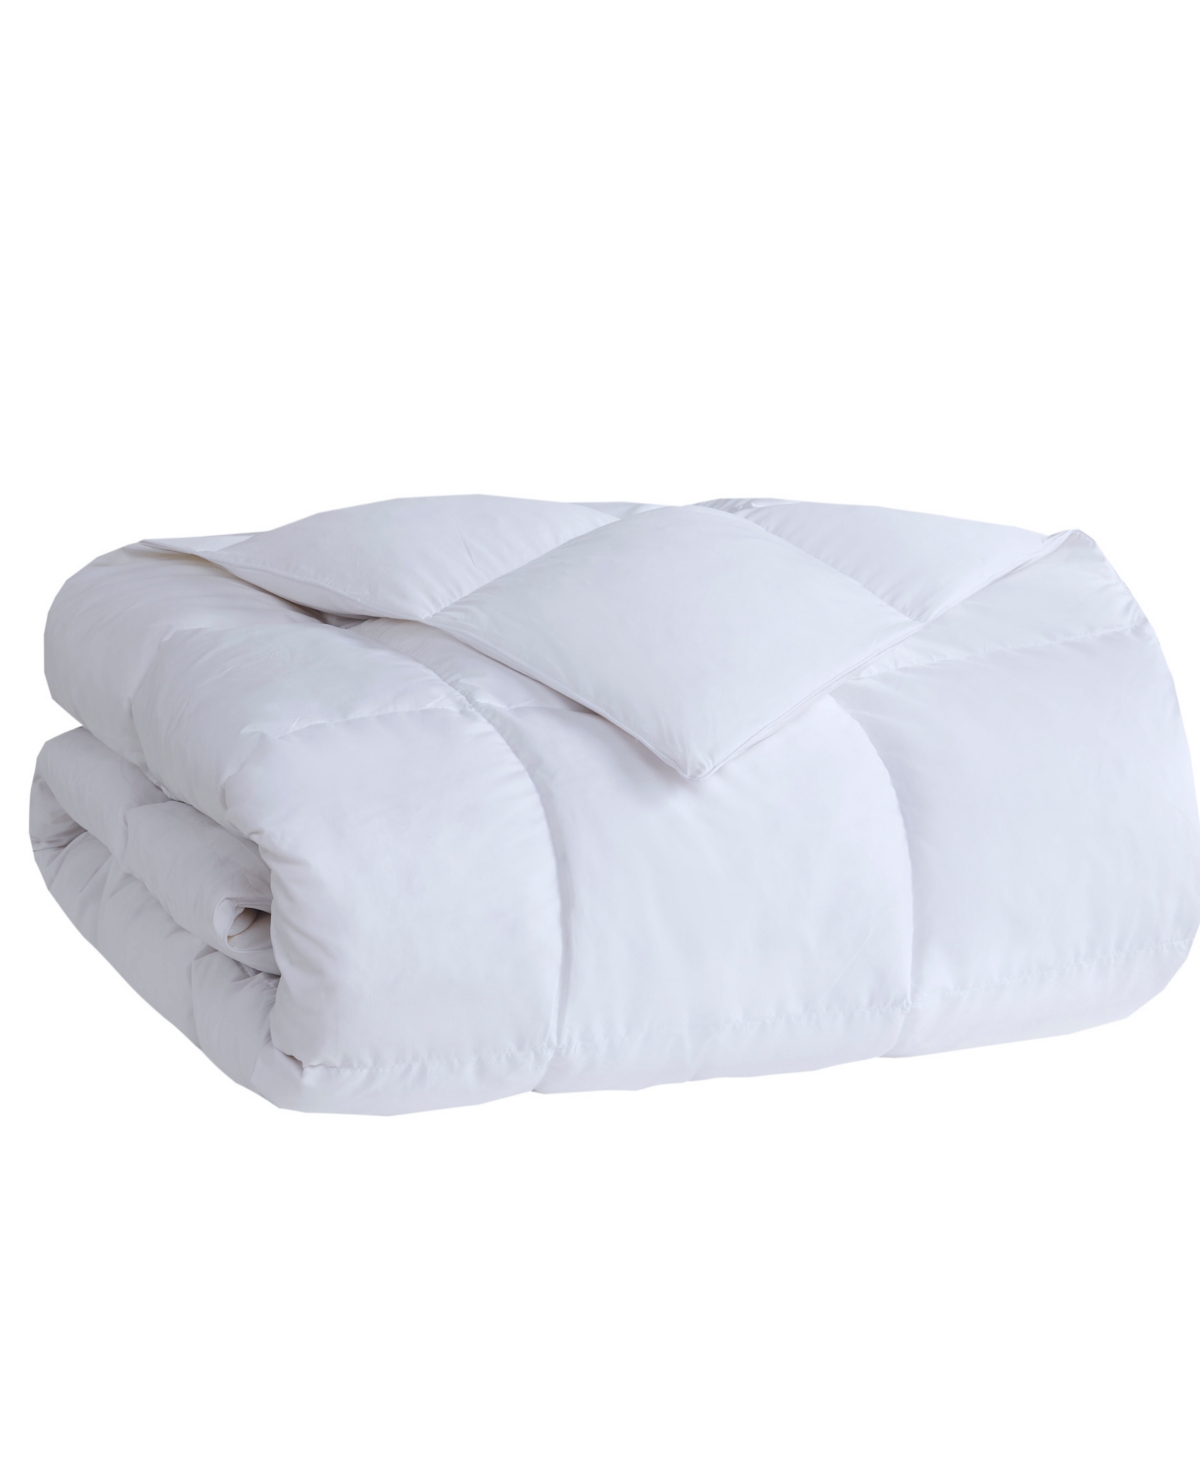 Sleep Philosophy Heavy Warmth Goose Feather & Goose Down Filling Comforter,, King/california King In White